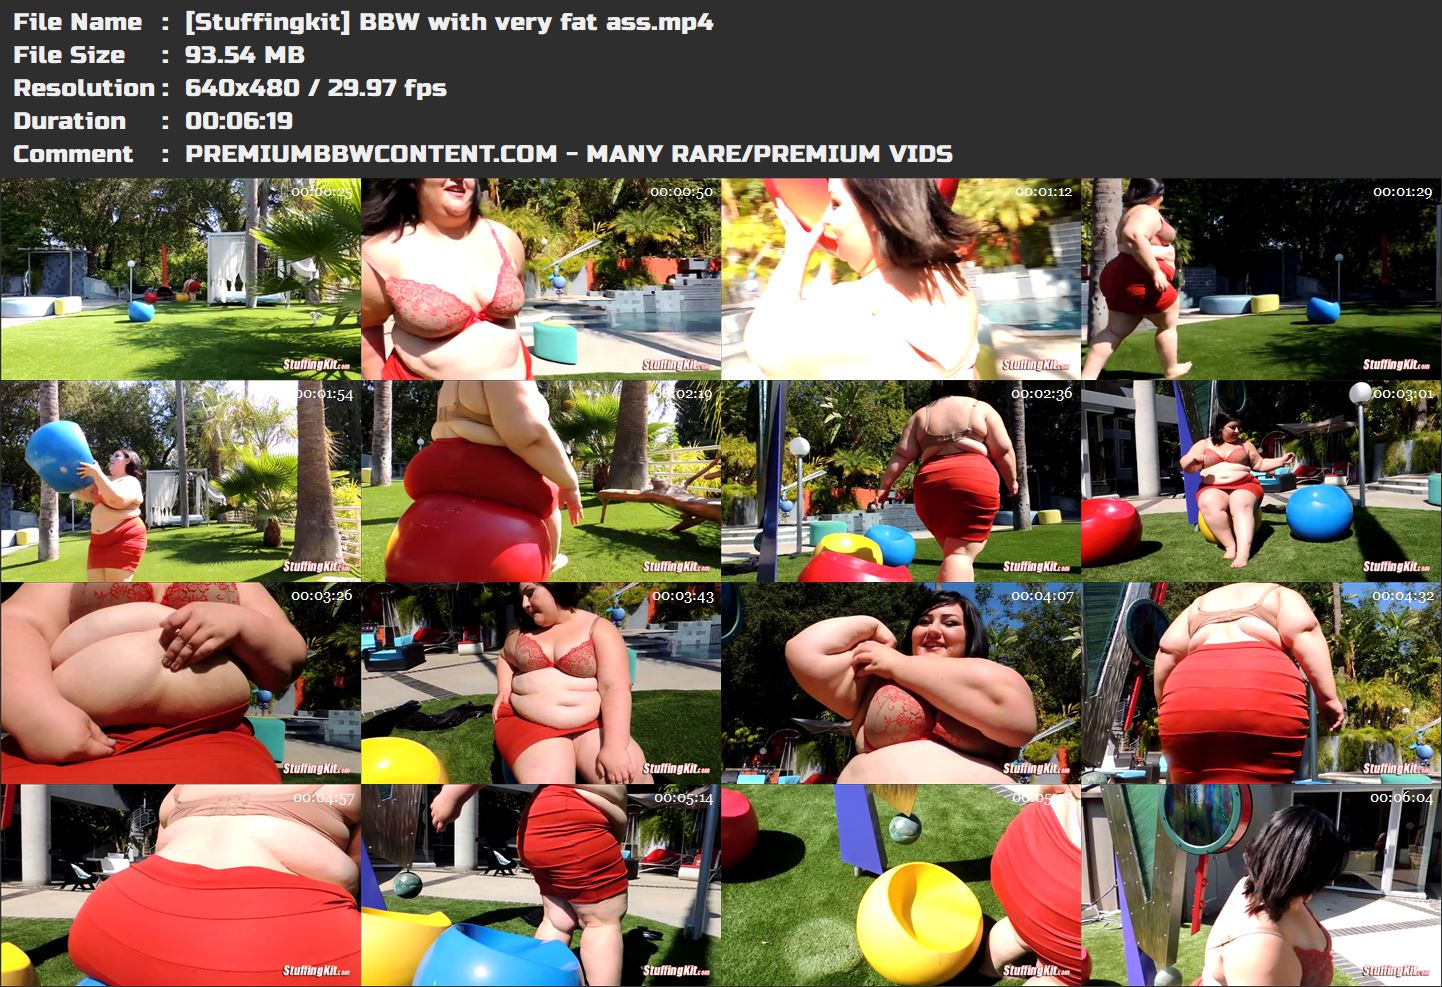 [Stuffingkit] BBW with very fat ass thumbnails